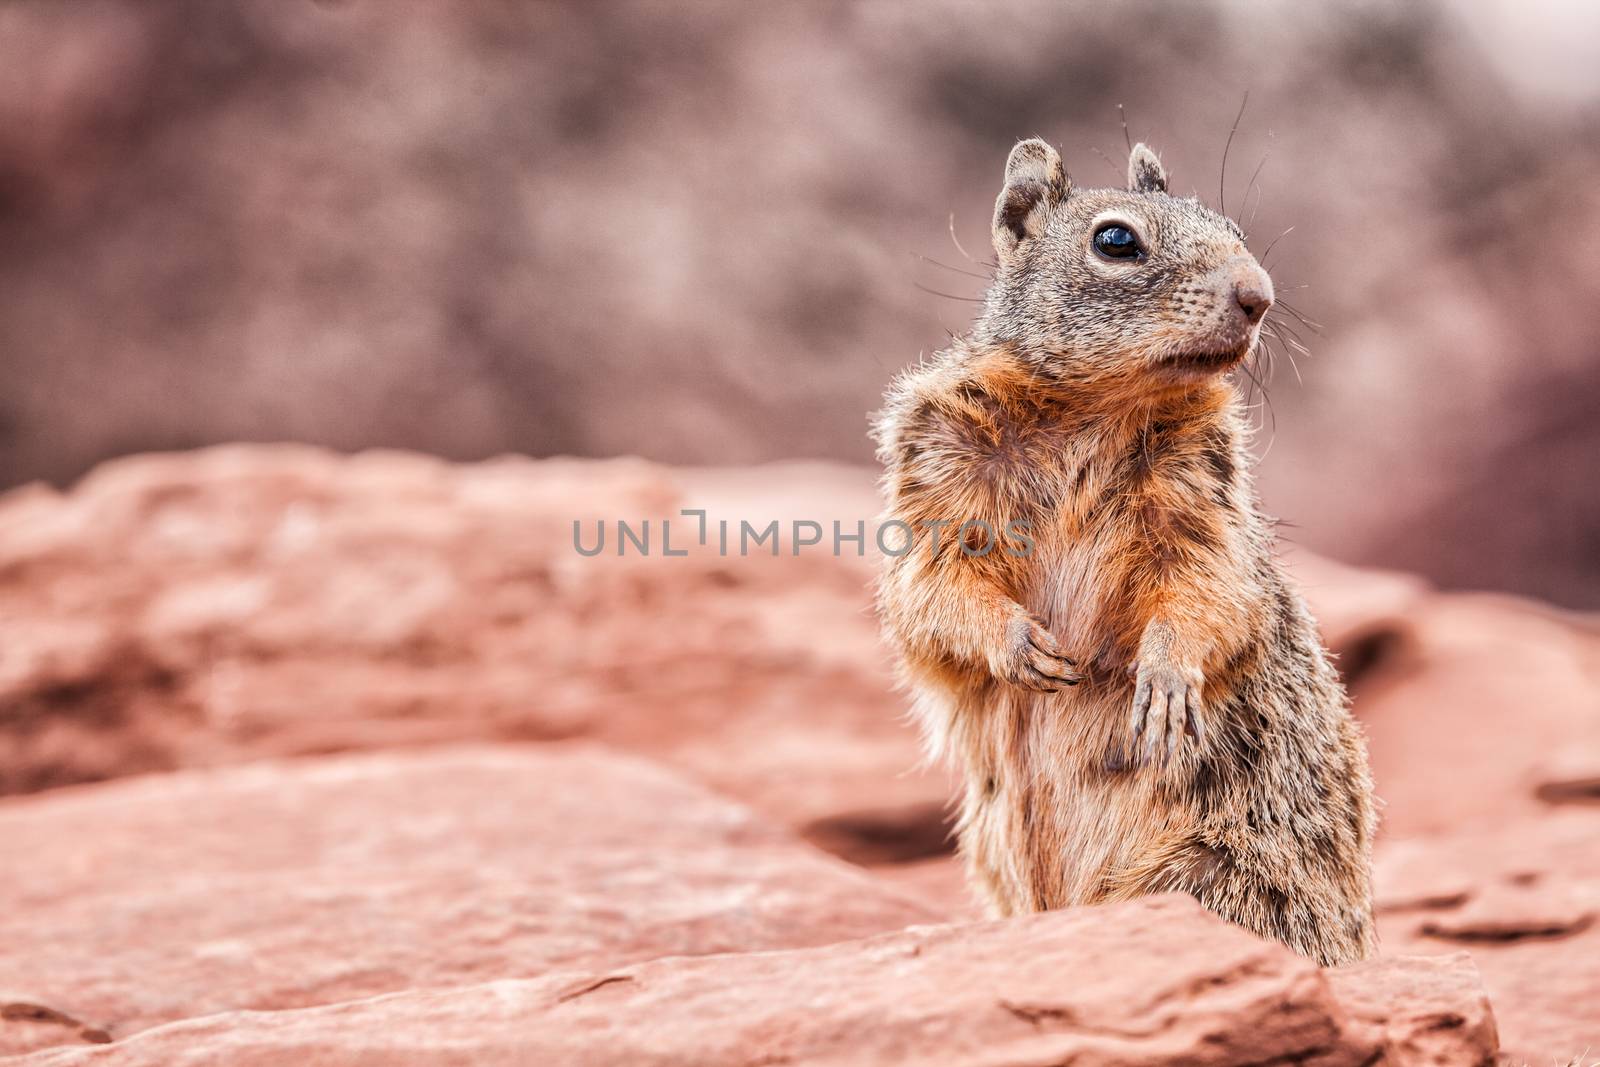 Grand Canyon squirrel wildlife. Cute furry animal looking at camera at Grand Canyon, tourist attraction.